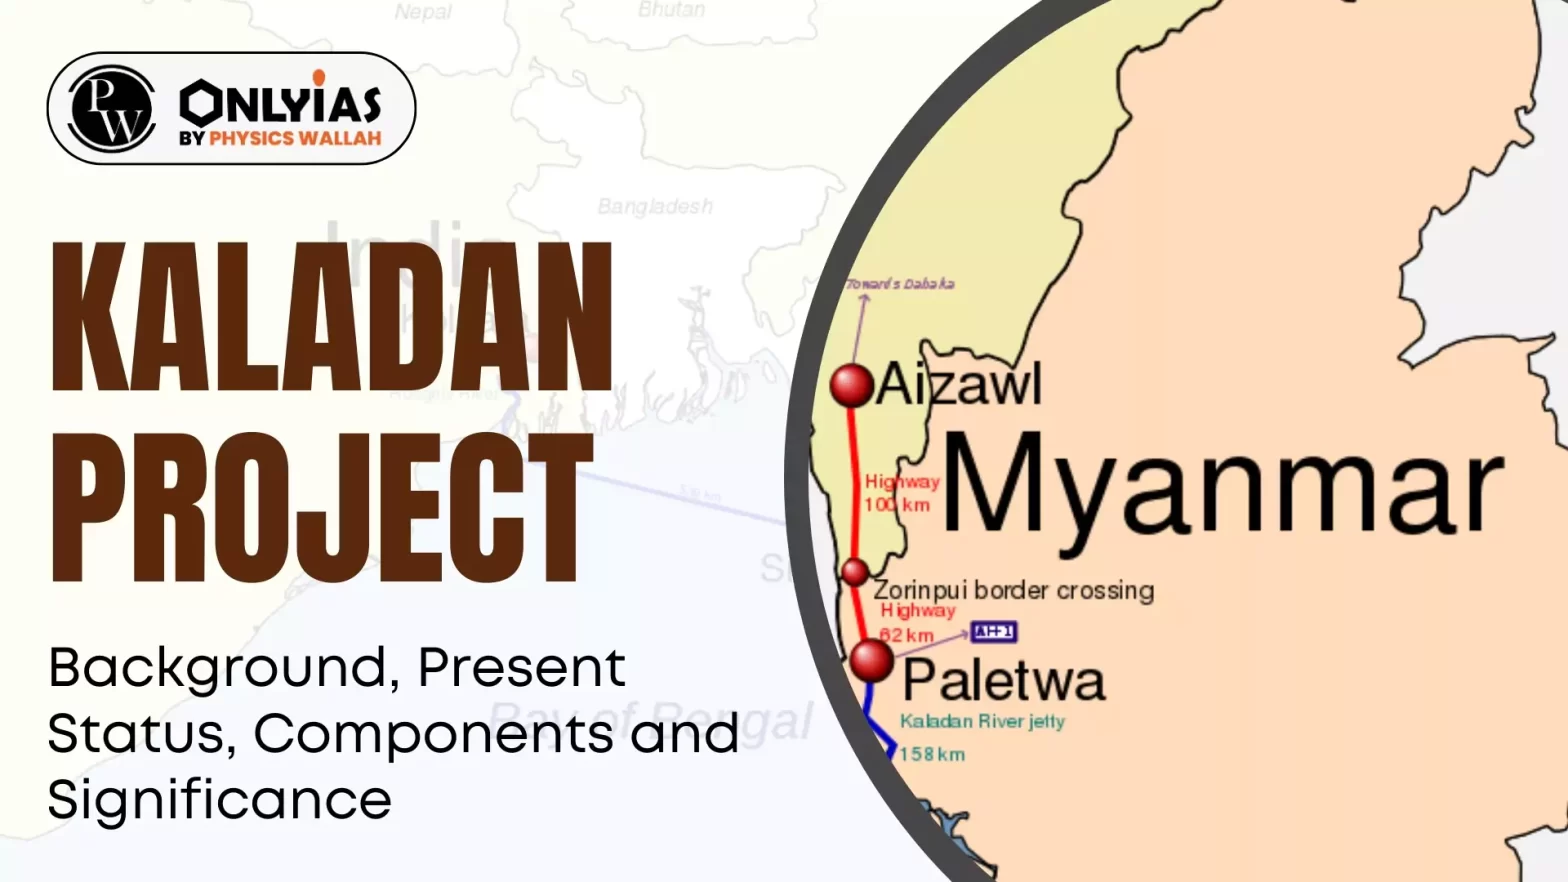 Kaladan Project: Background, Present Status, Components and Significance